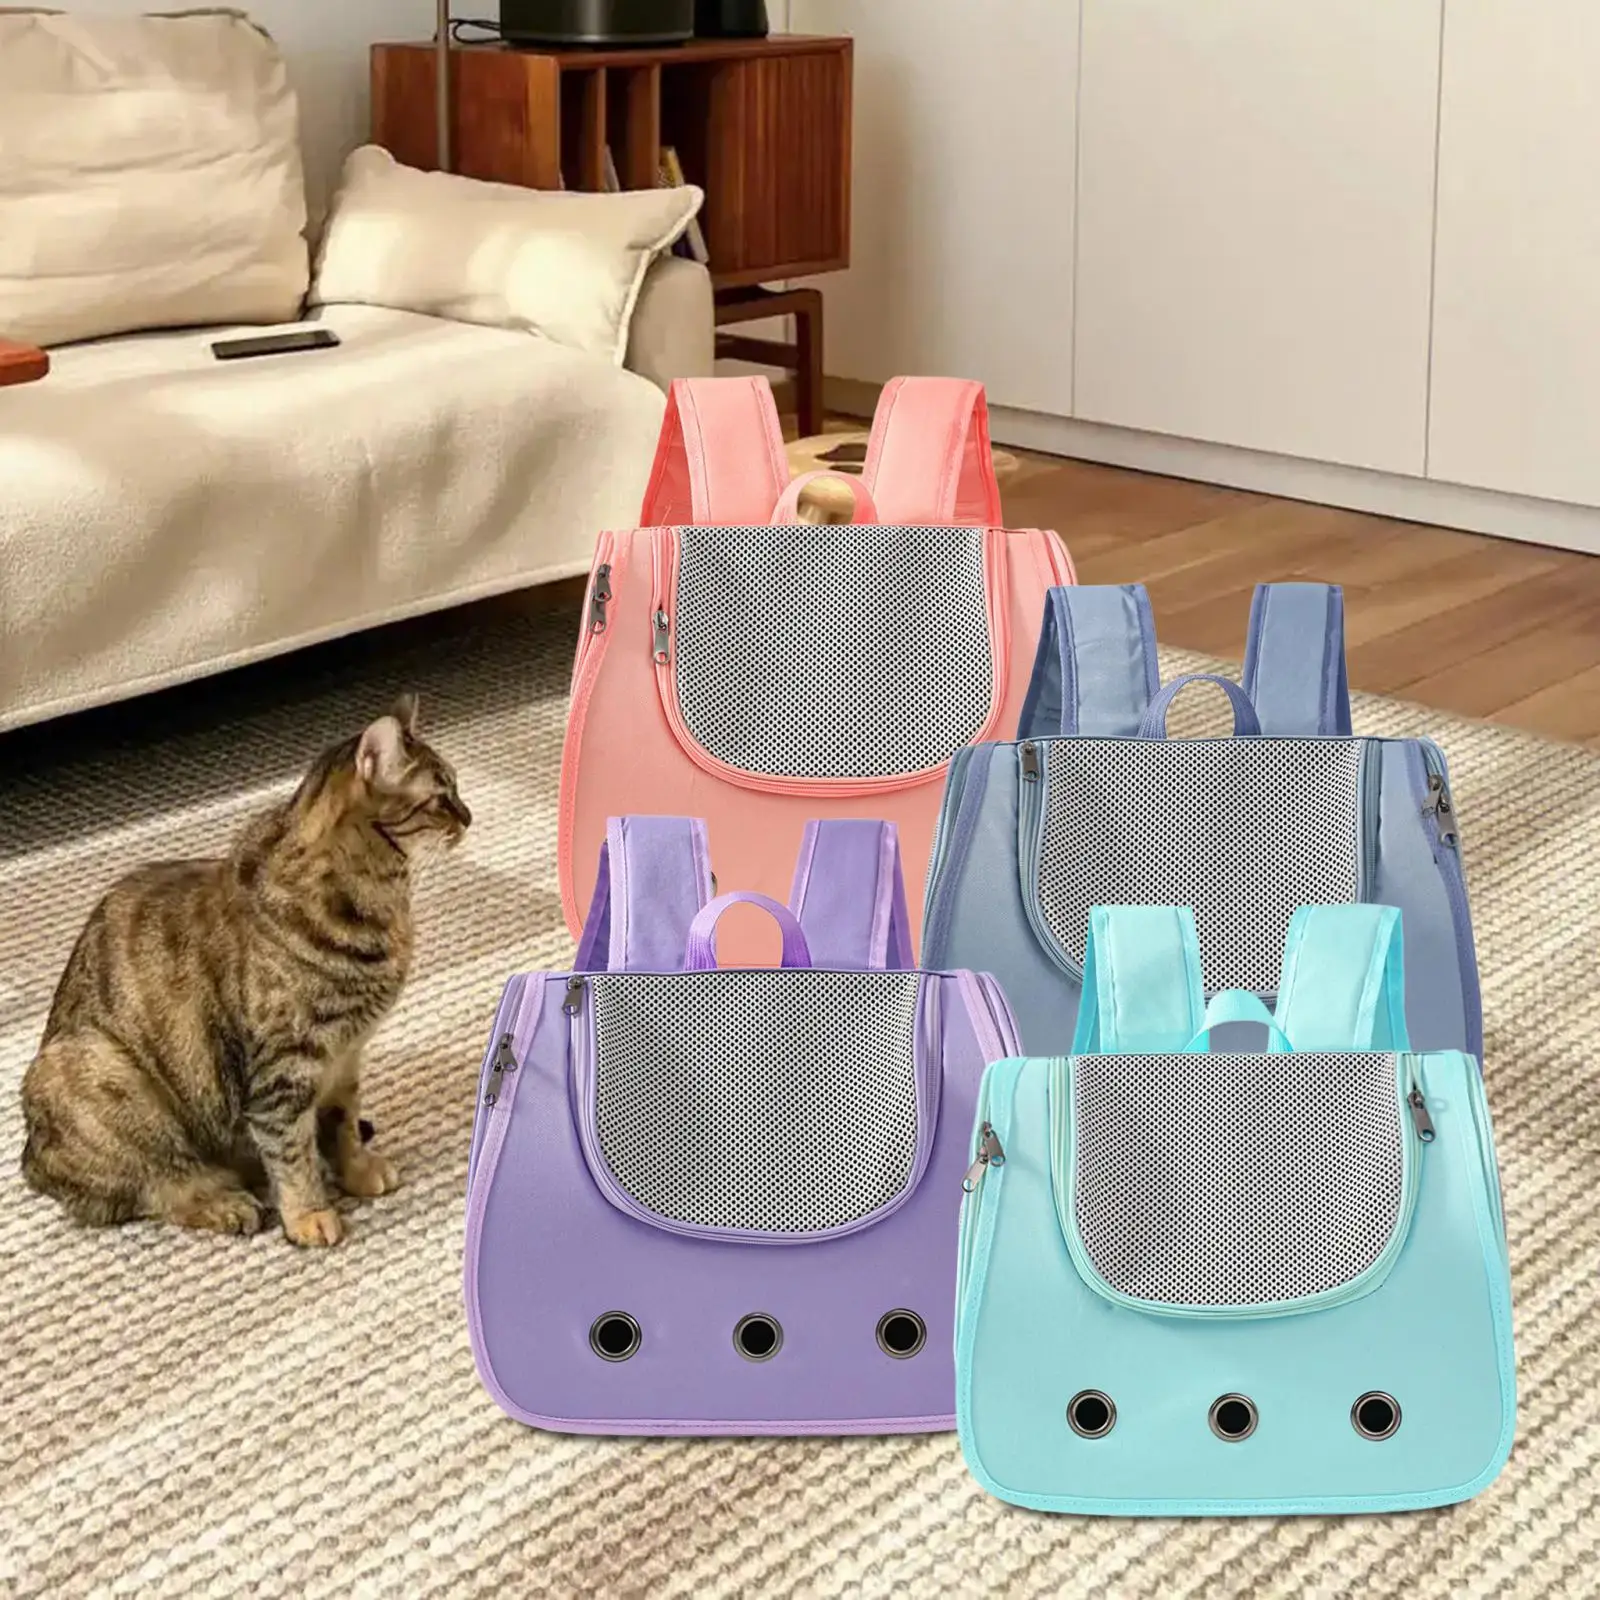 Cat Backpack Carrier Ventilated Dog Cat Carrier for Hiking Walking Traveling